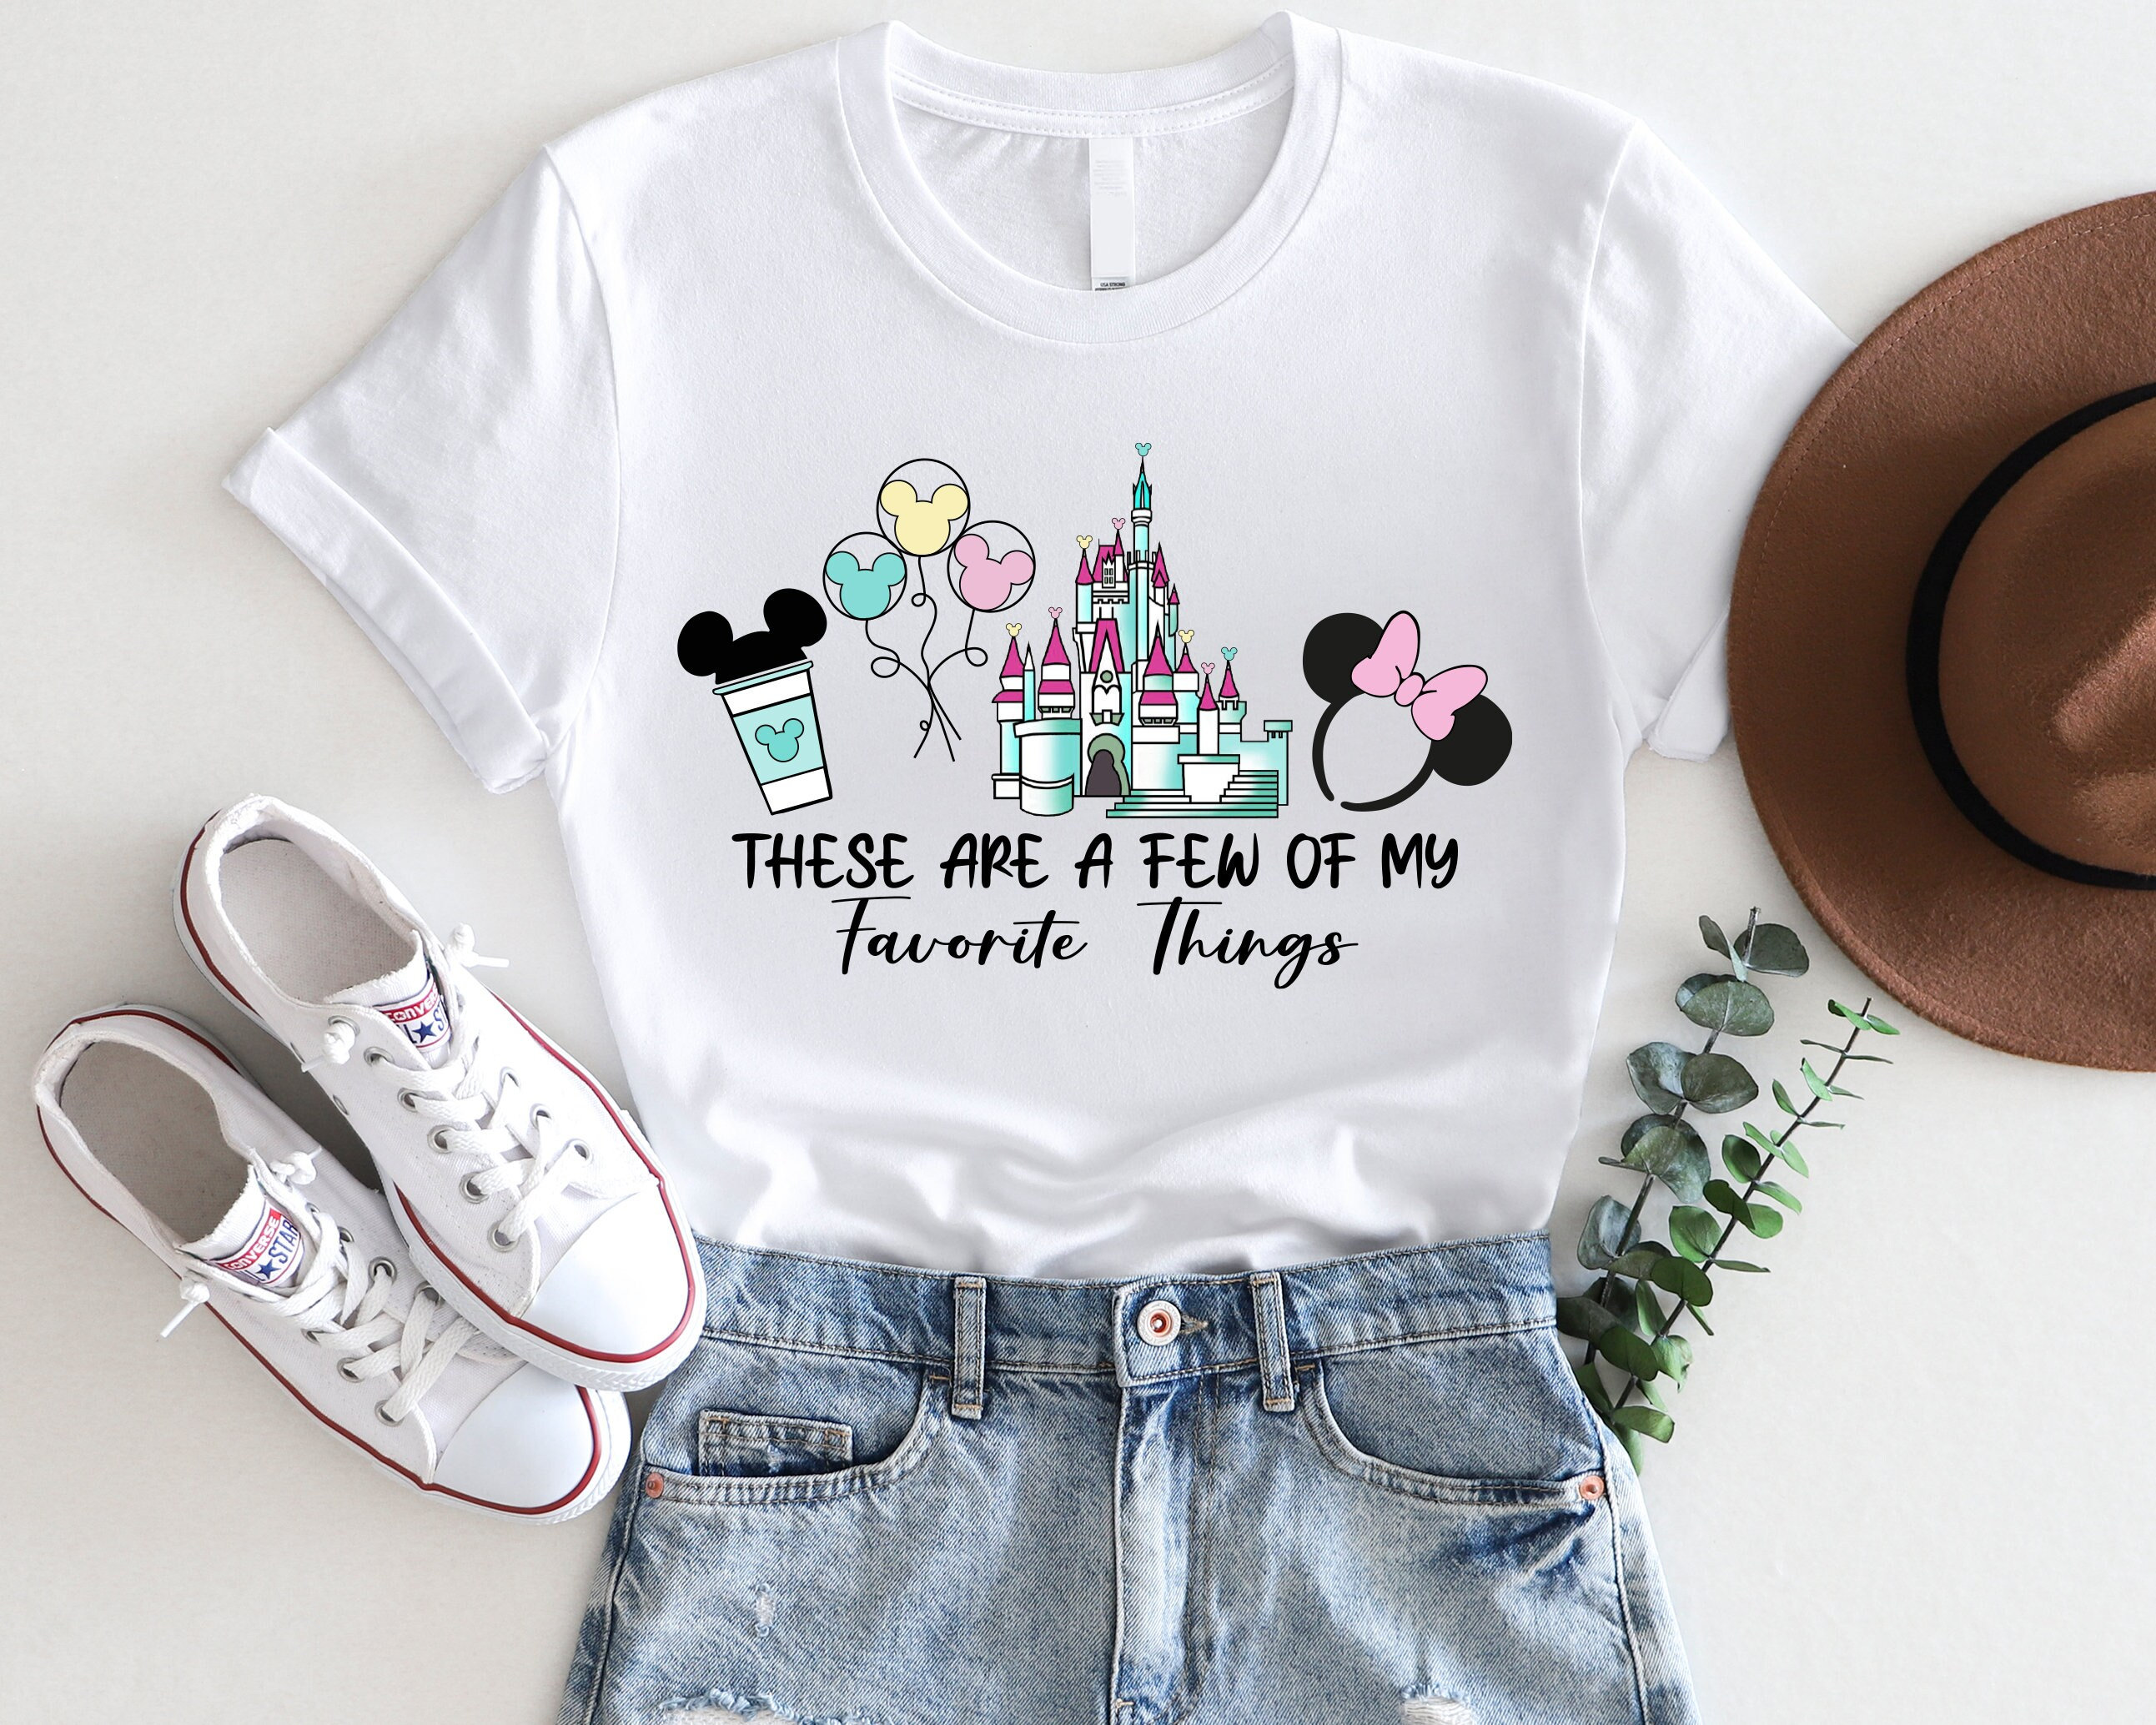 Disney Family Trip Shirt, These Are A Few Of My Favorite Things Shirt, Mickey and Minnie Mouse Shirt, Disney Family Shirt, Disneyland Castle